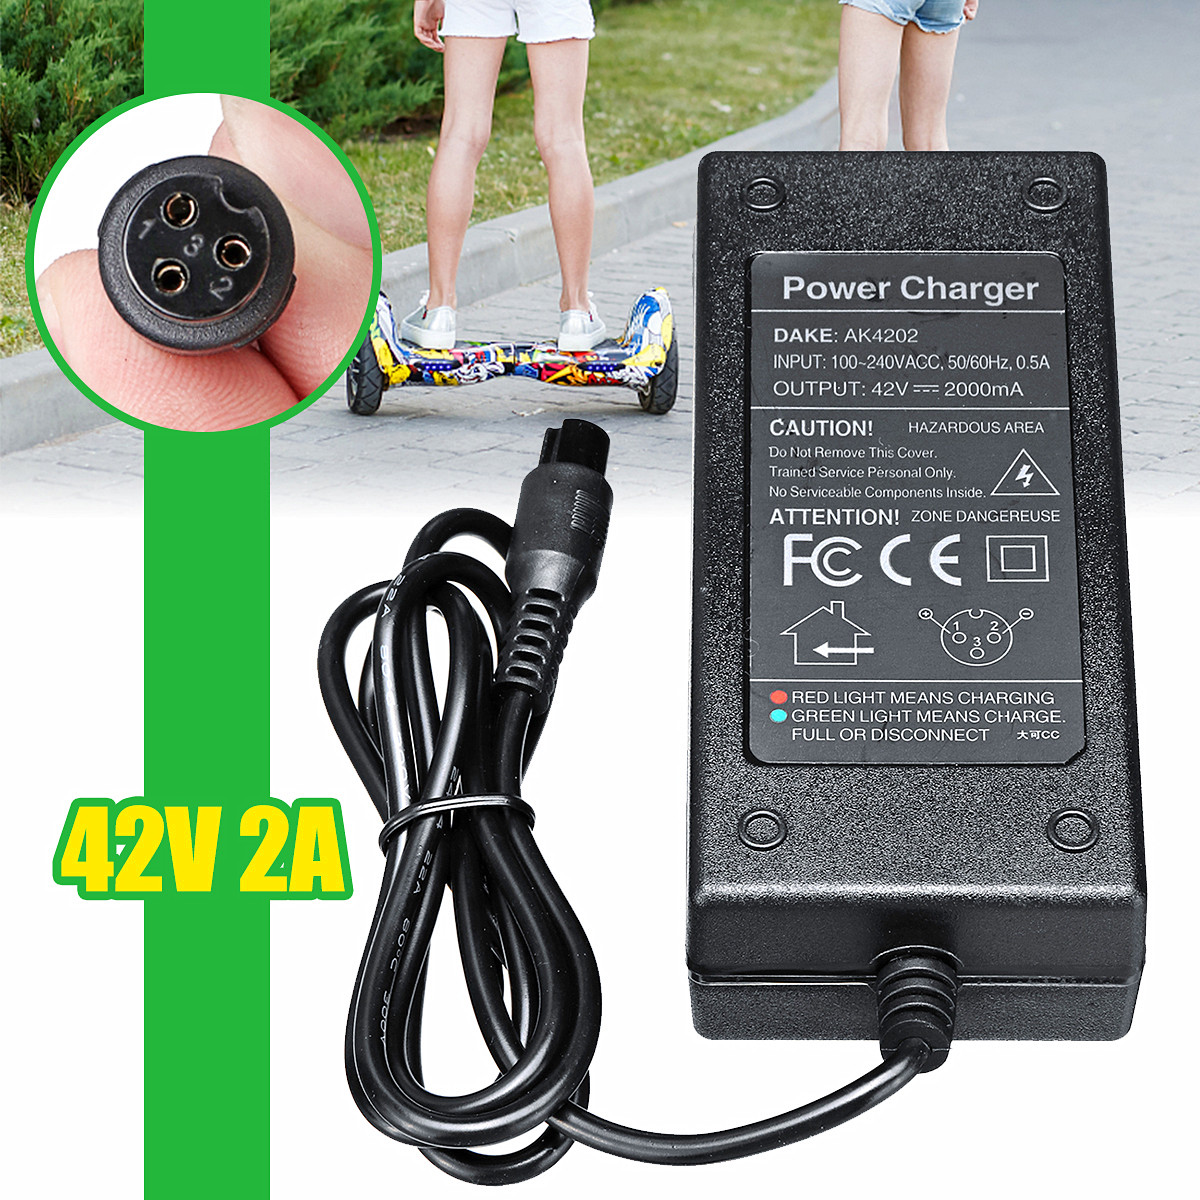 42V-2A-Power-Adapter-Battery-Charger-For-2-Wheel-Electric-Balance-Scooter-UK-Plug-1368826-2